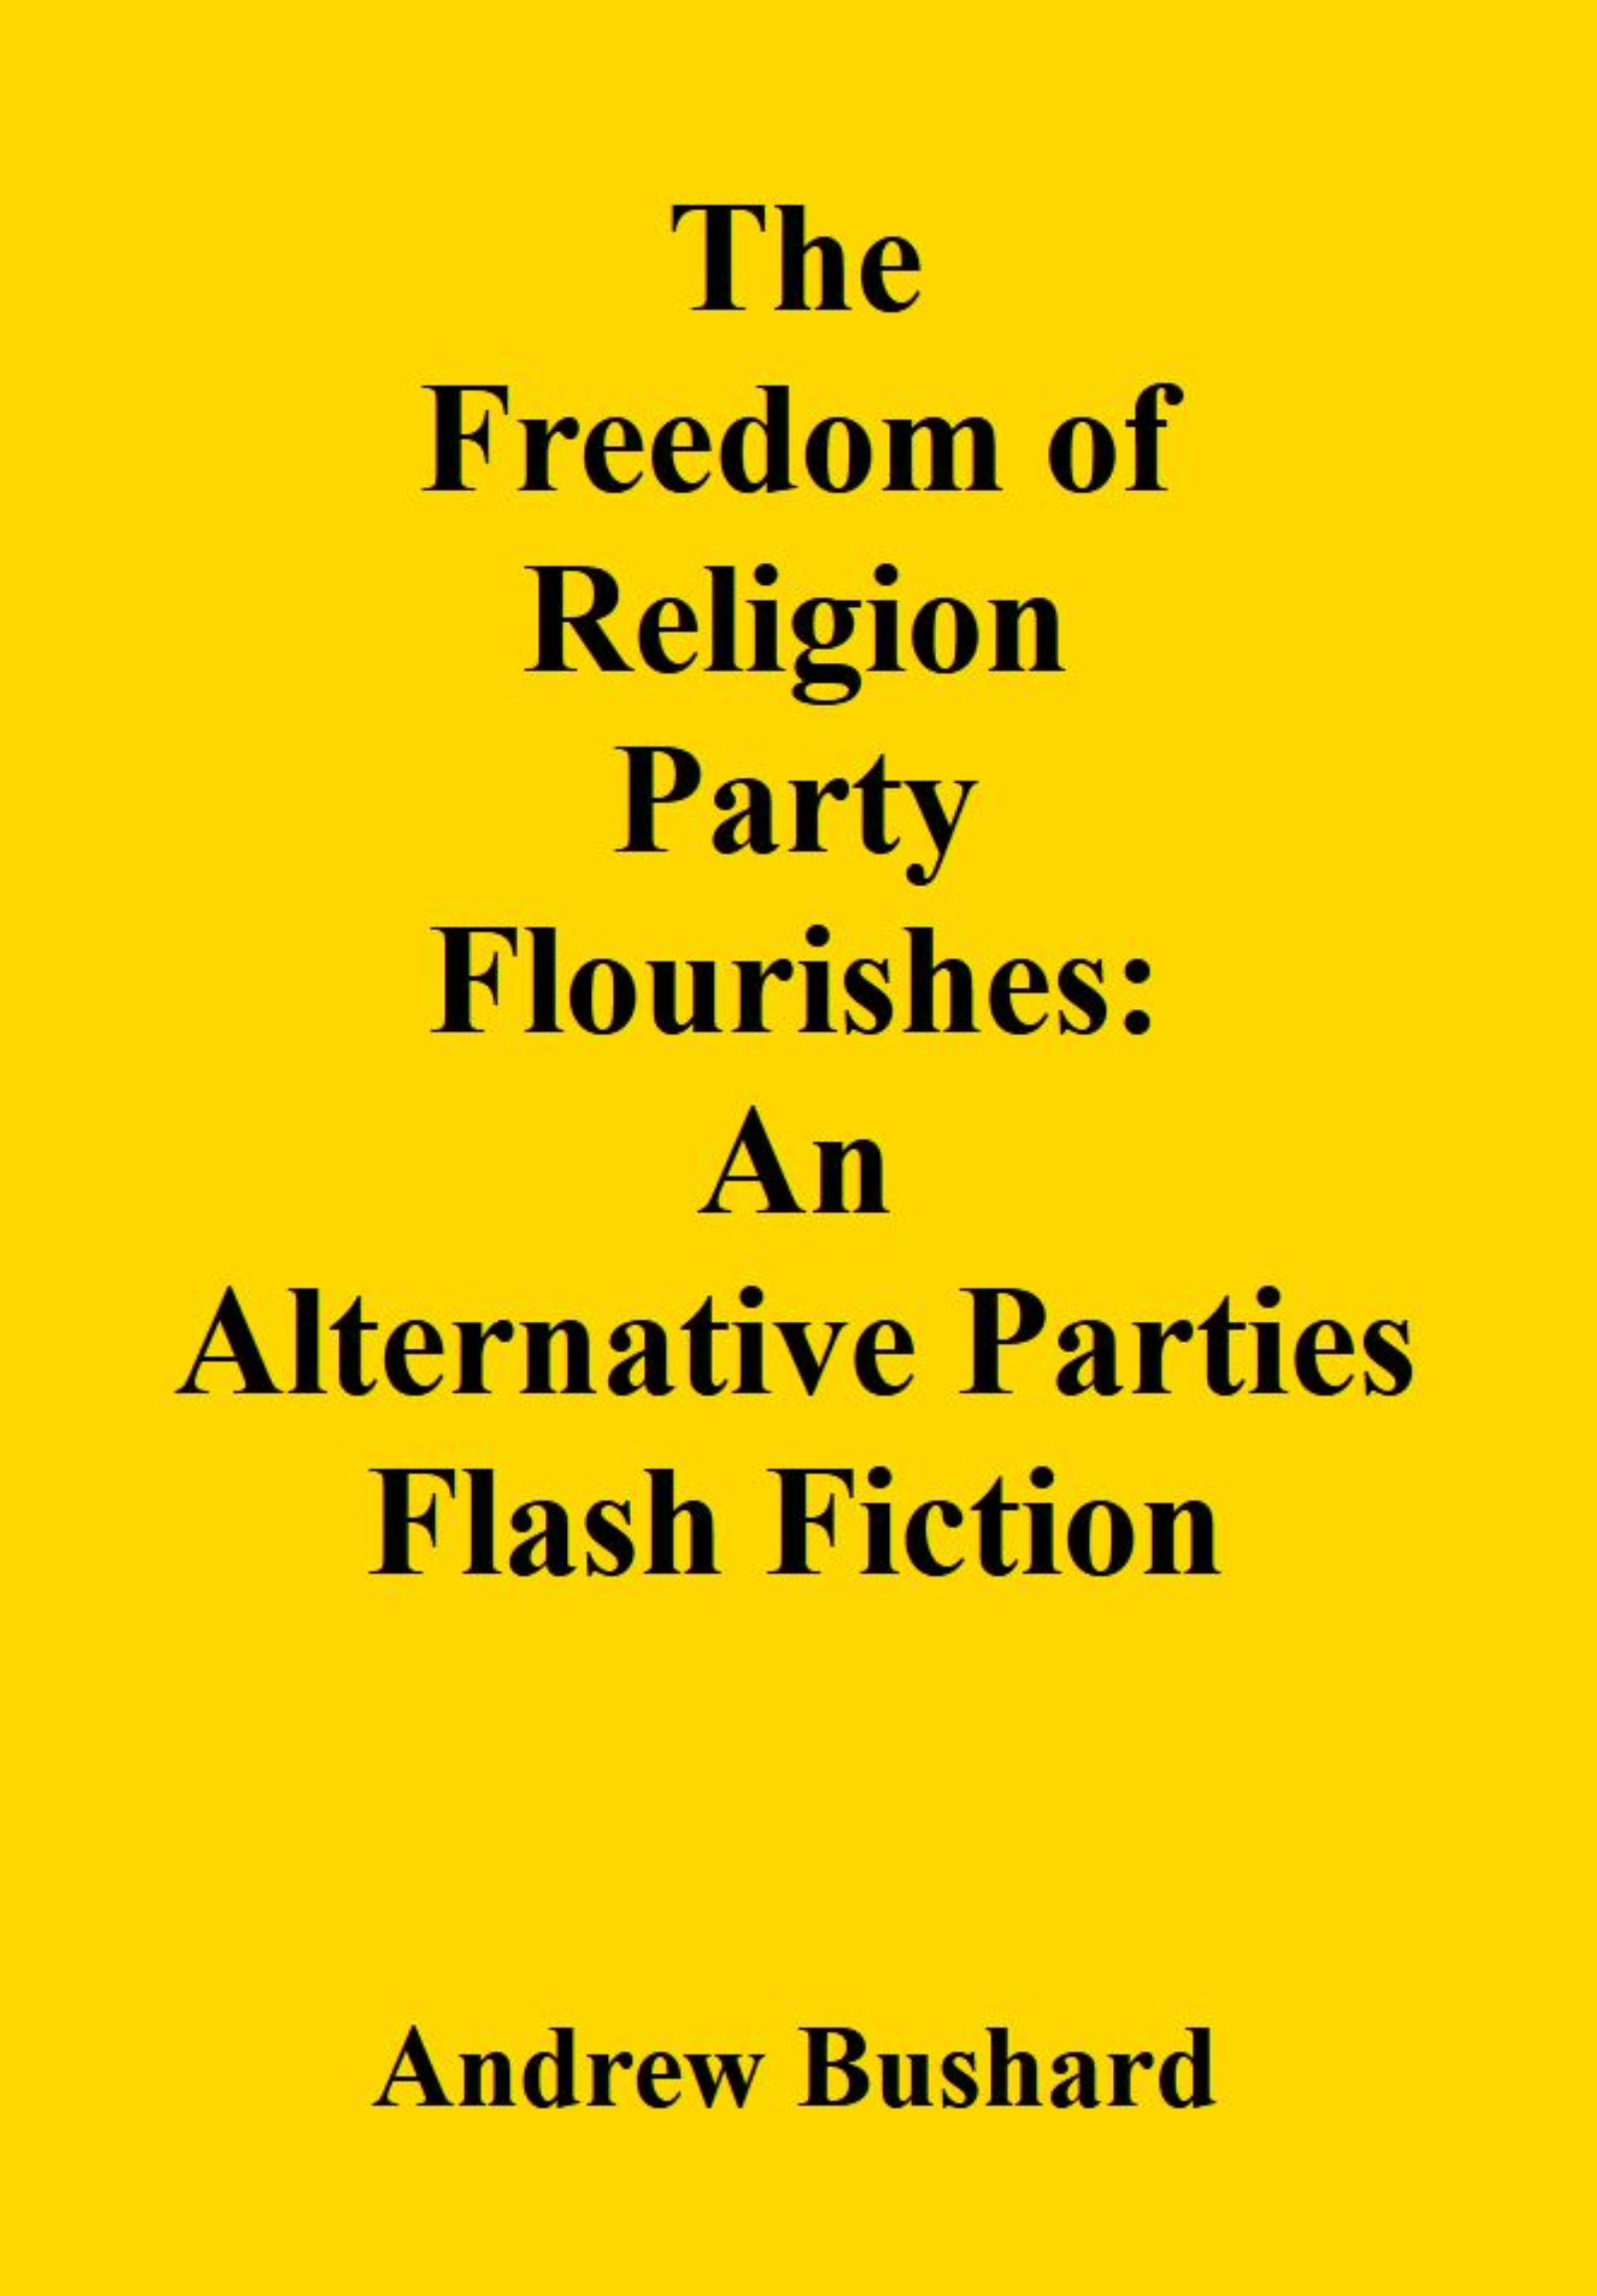 The Freedom of Religion Party Flourishes: An Alternative Parties Flash Fiction Audiobook